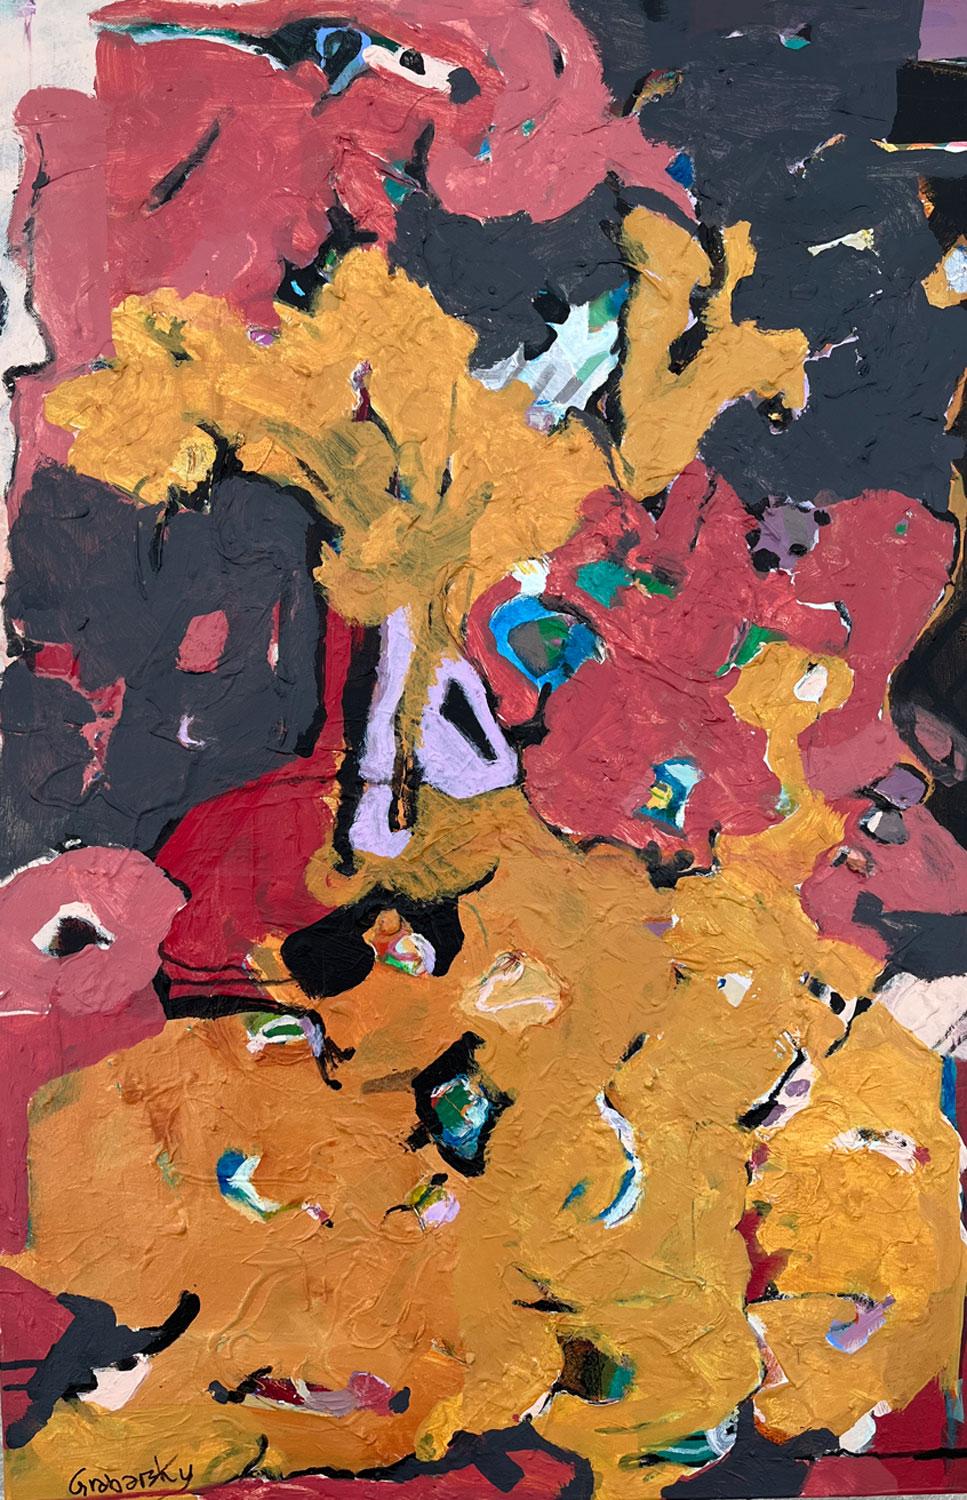 <p>Artist Comments<br>Artist Sheila Grabarsky demonstrates an abstraction of interlacing colors with hints of green, blue, and white peeping from the predominantly maroon, black, and mustard yellow background. A whimsical portrayal of ever-changing